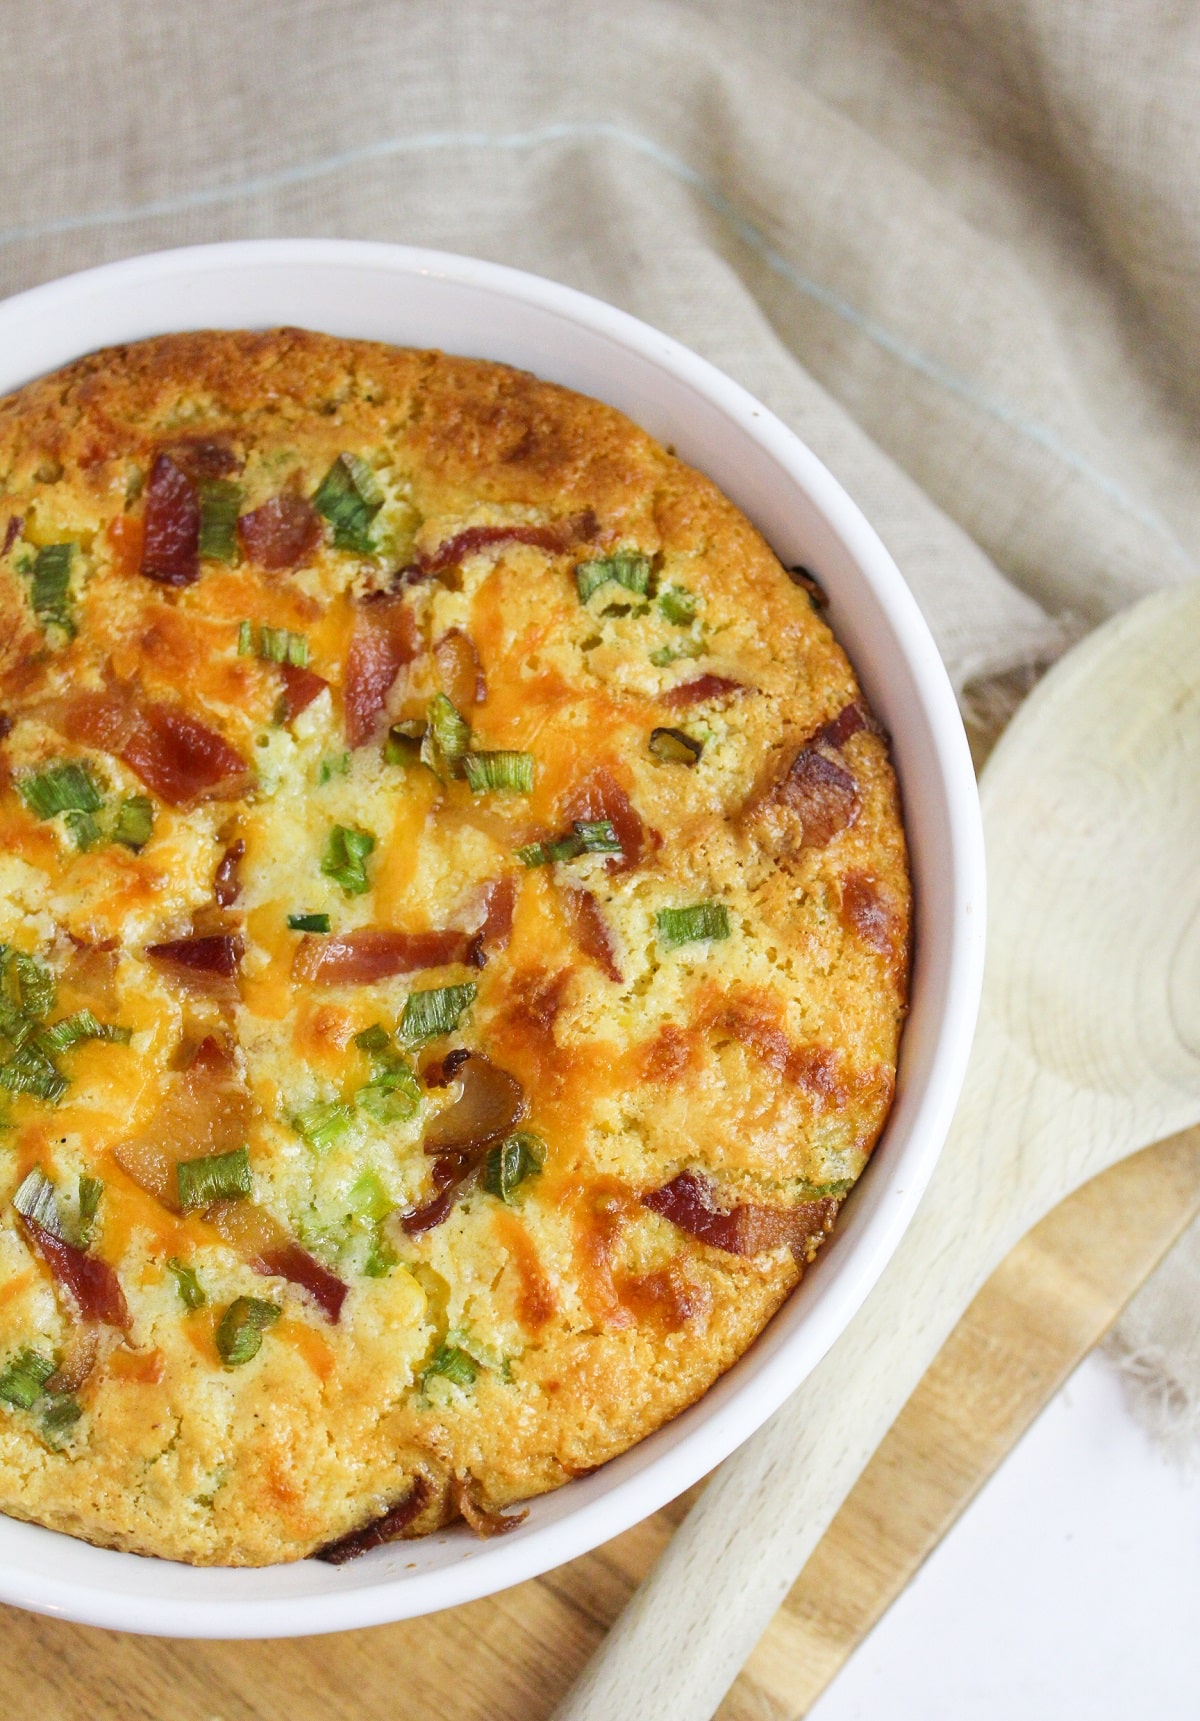 corn casserole topped with bacon, green onion, and cheese in a white baking dish.